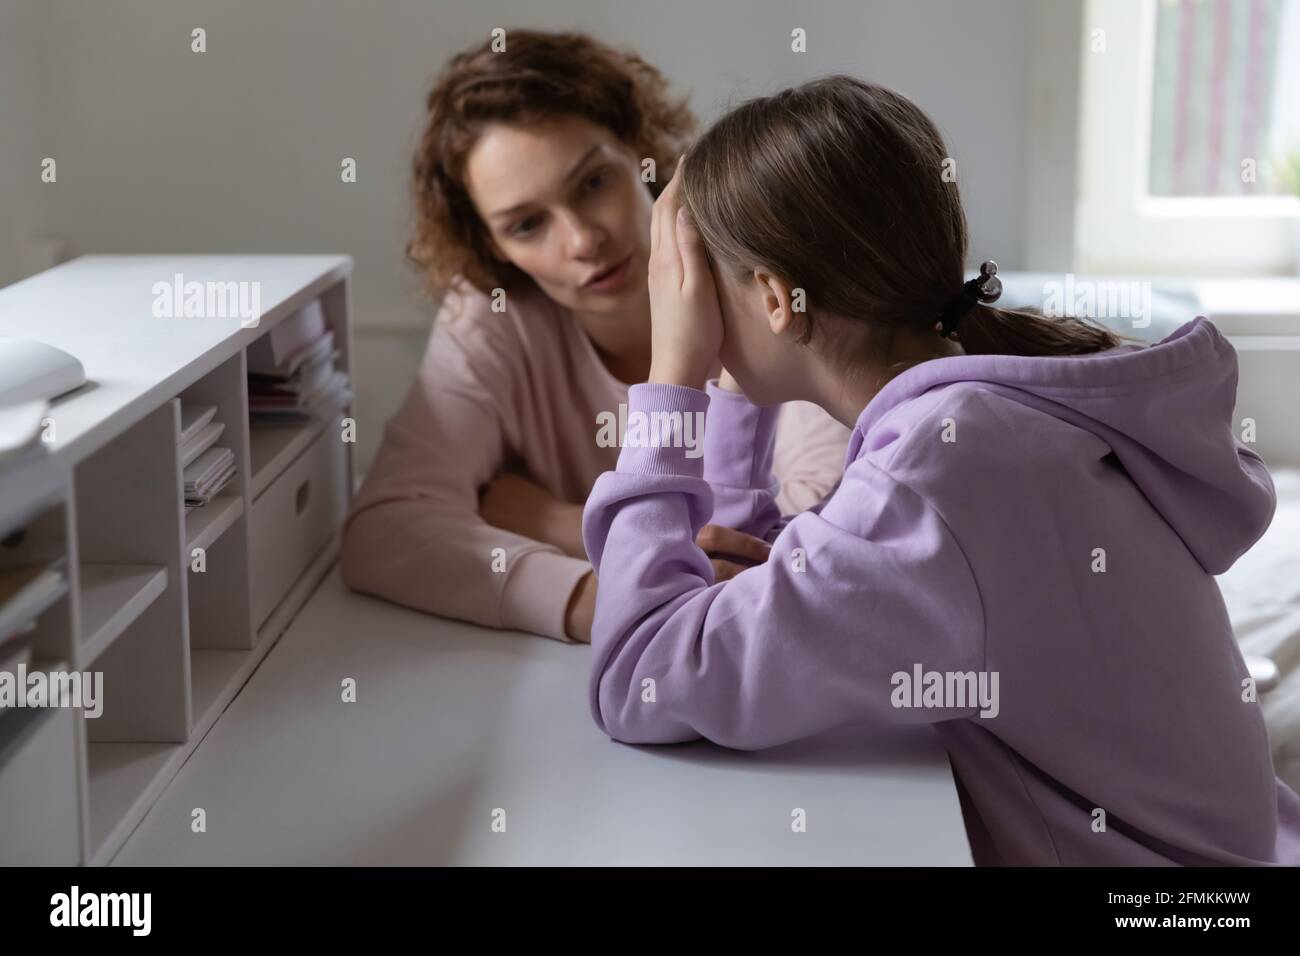 Caring mother talking to stressed adolescent daughter. Stock Photo